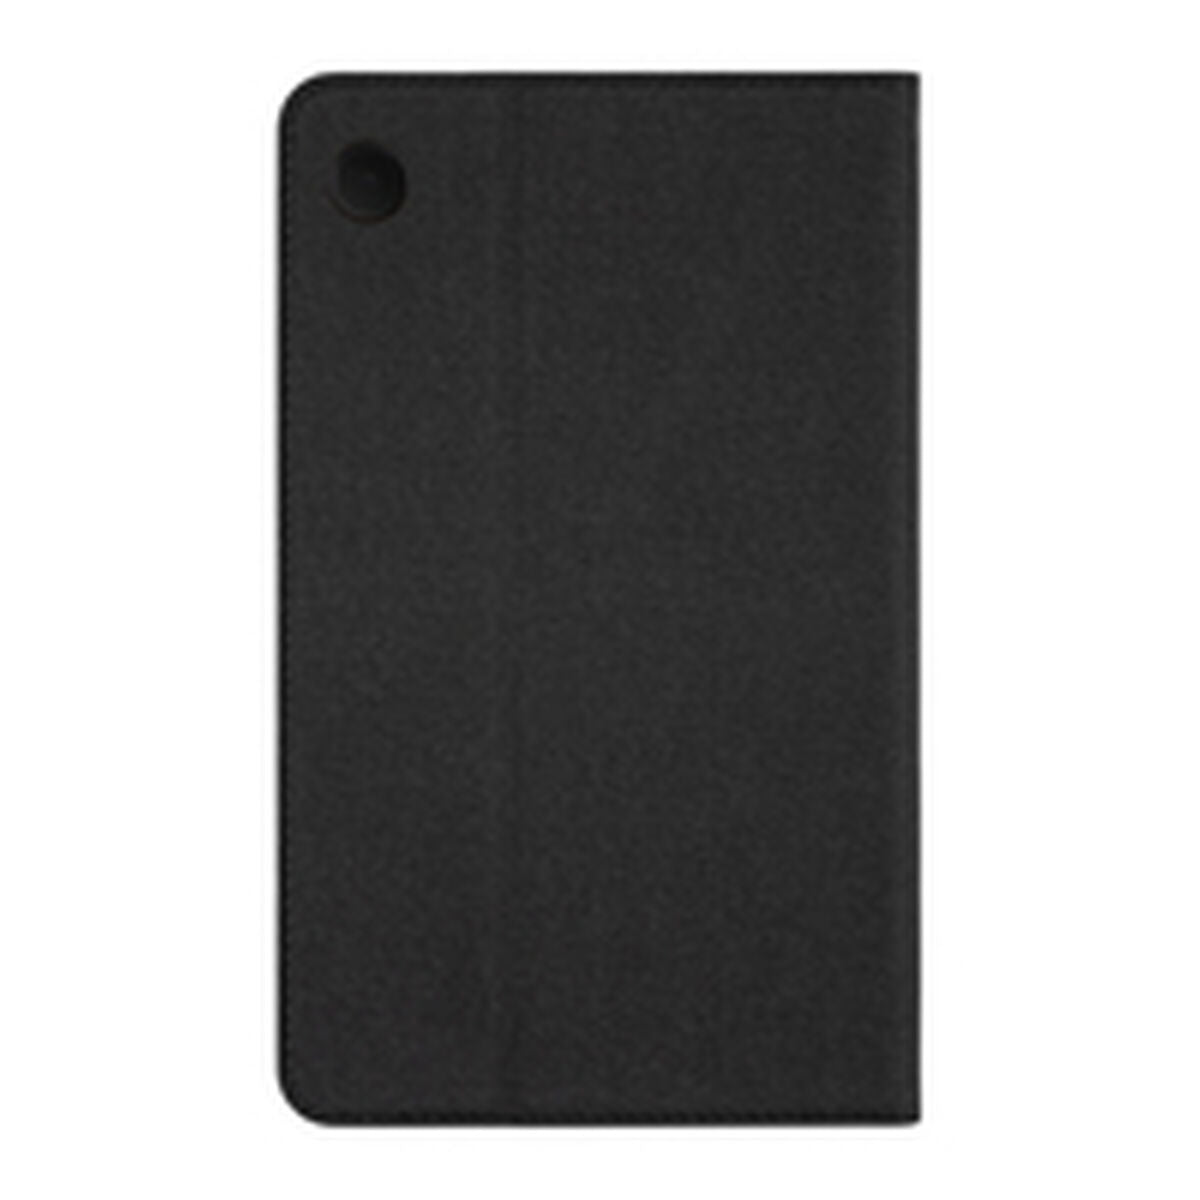 Tablet cover Gecko Covers V11T69C1 Black